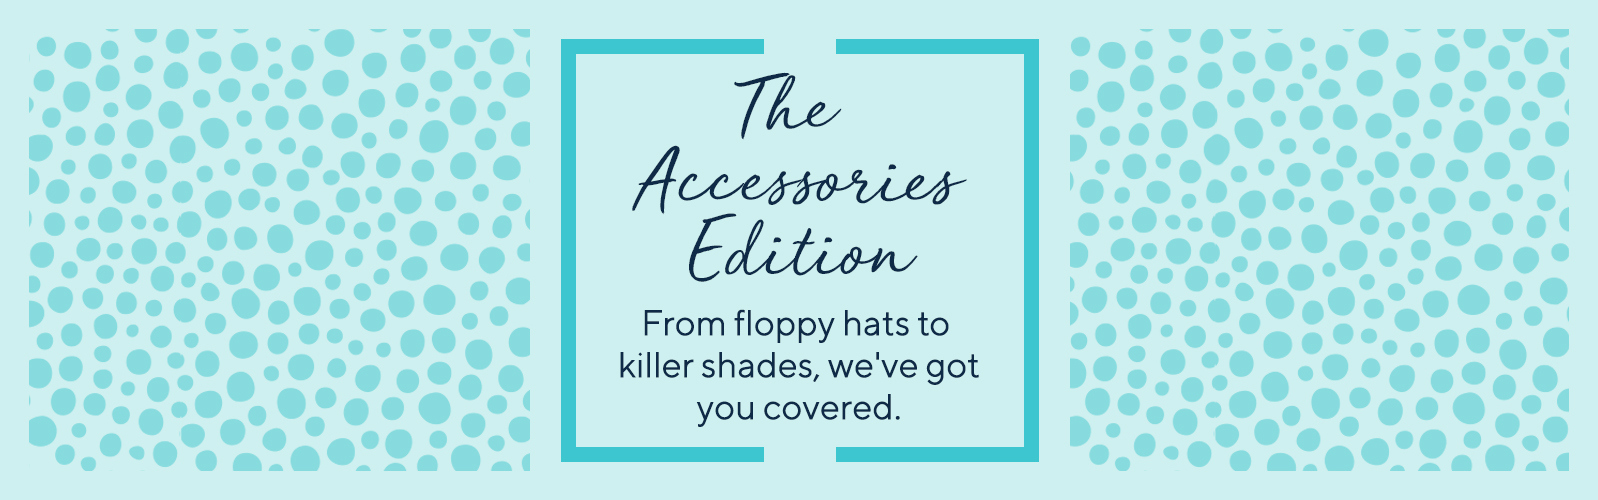 The Accessories Edition From floppy hats to killer shades, we've got you covered.